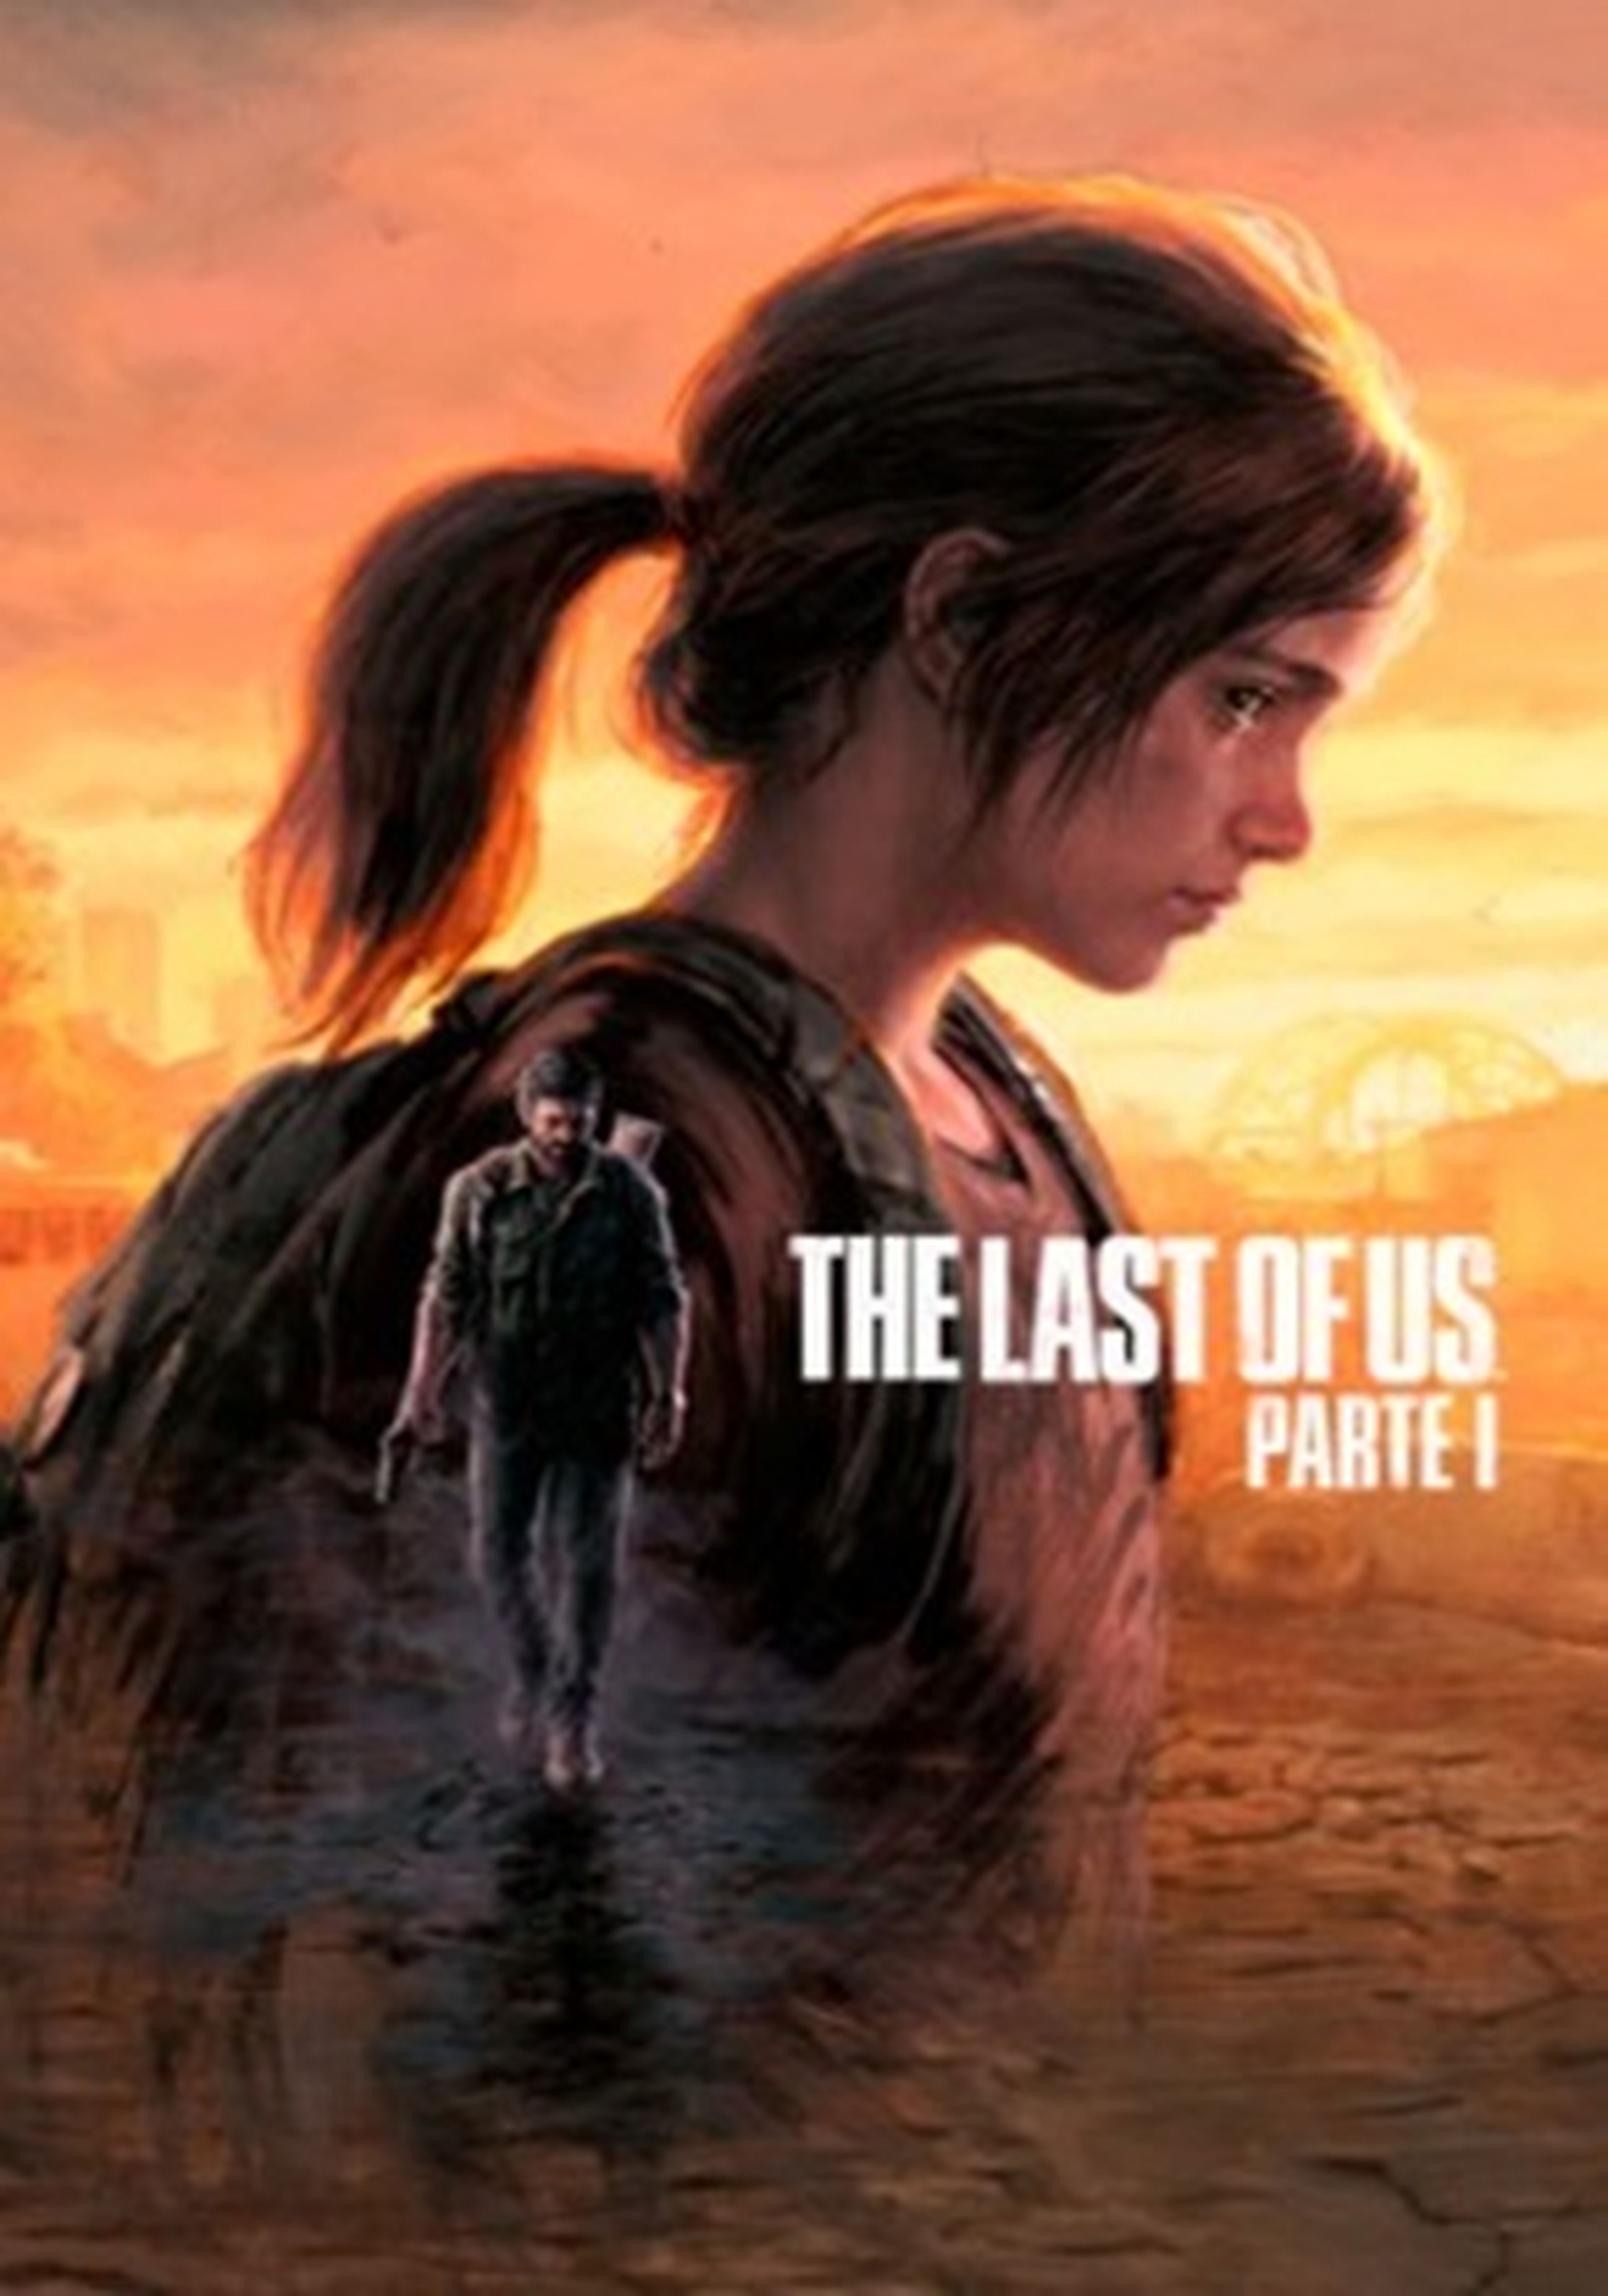 The Last of Us Parte I cartel